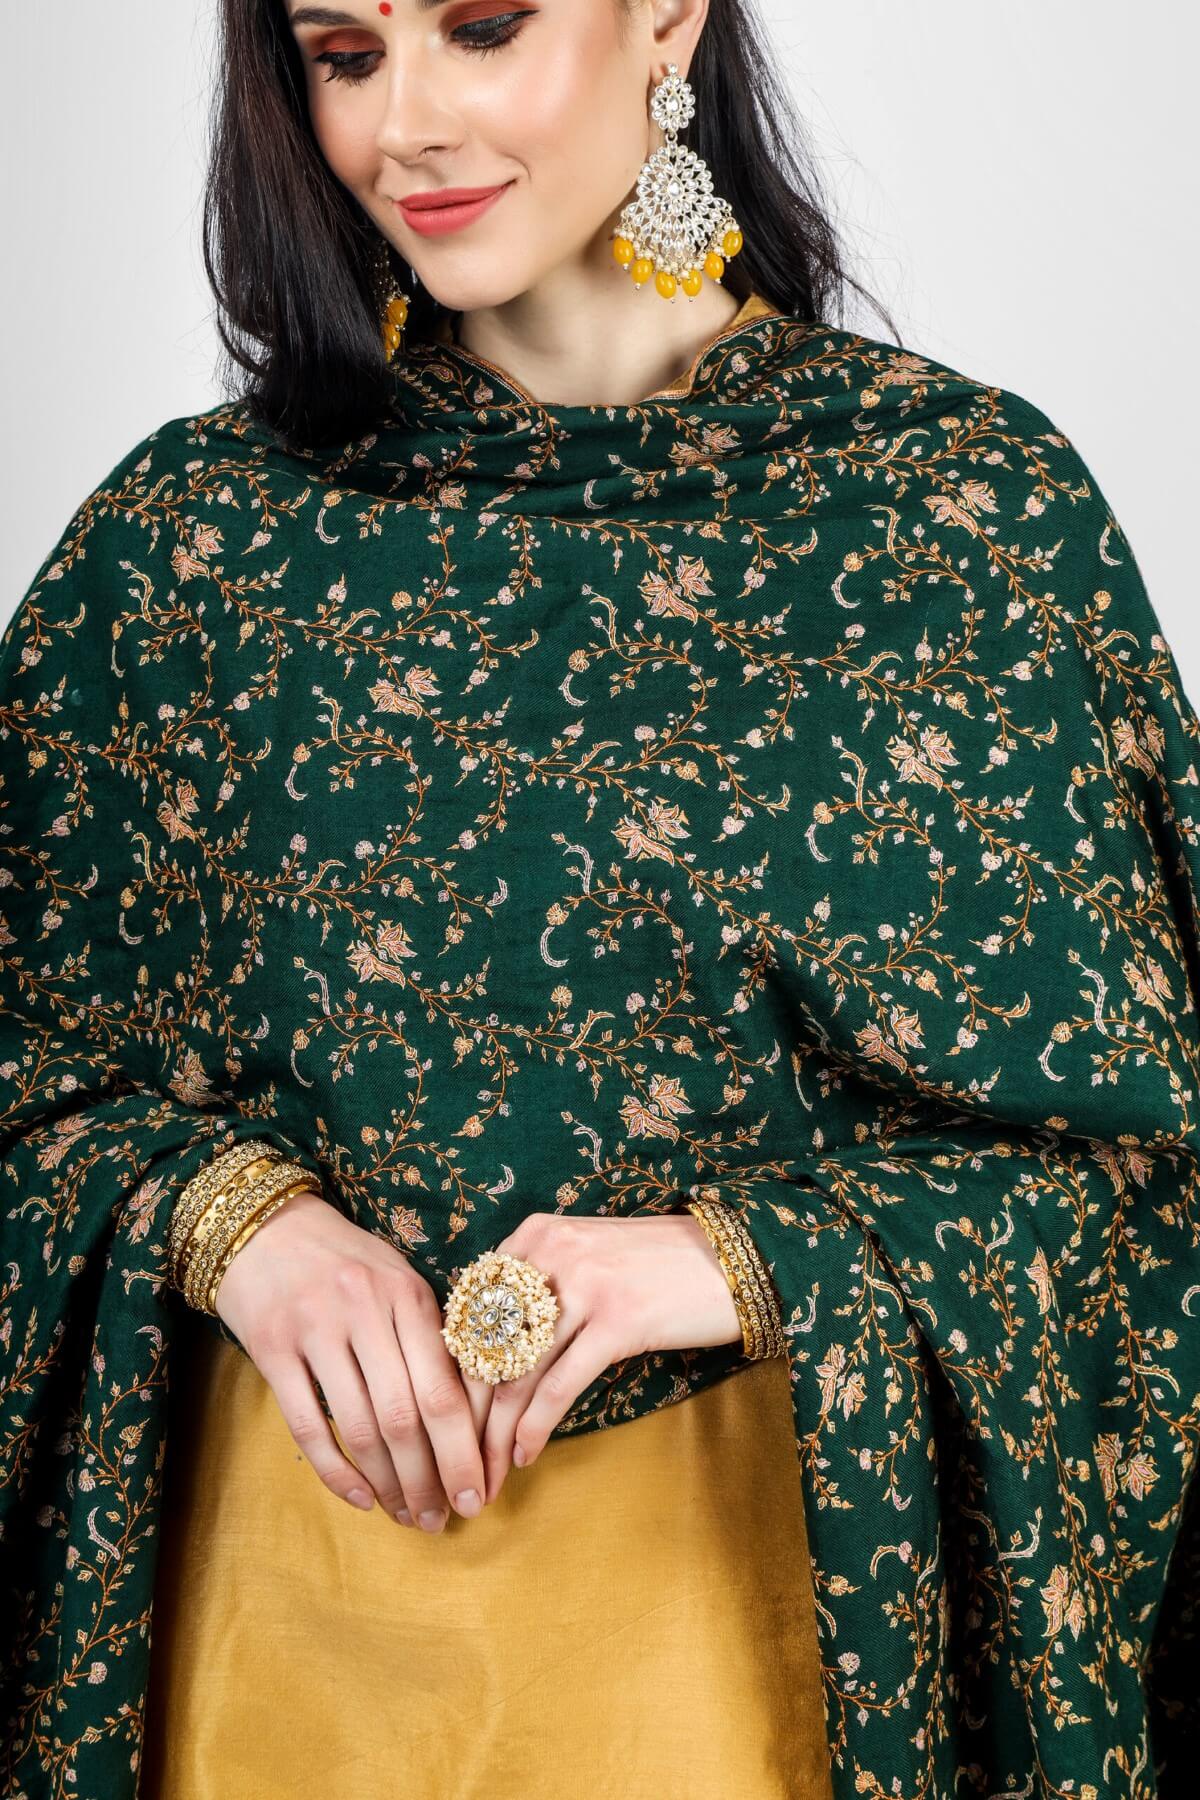 PASHMINA - Overall, the Lotus Green Pashmina Jaldaar Sozni Embroidered Shawl is a beautiful and luxurious piece that can be worn for special occasions or used as a statement piece to elevate any outfit. It also makes for a thoughtful and meaningful gift for a loved one.